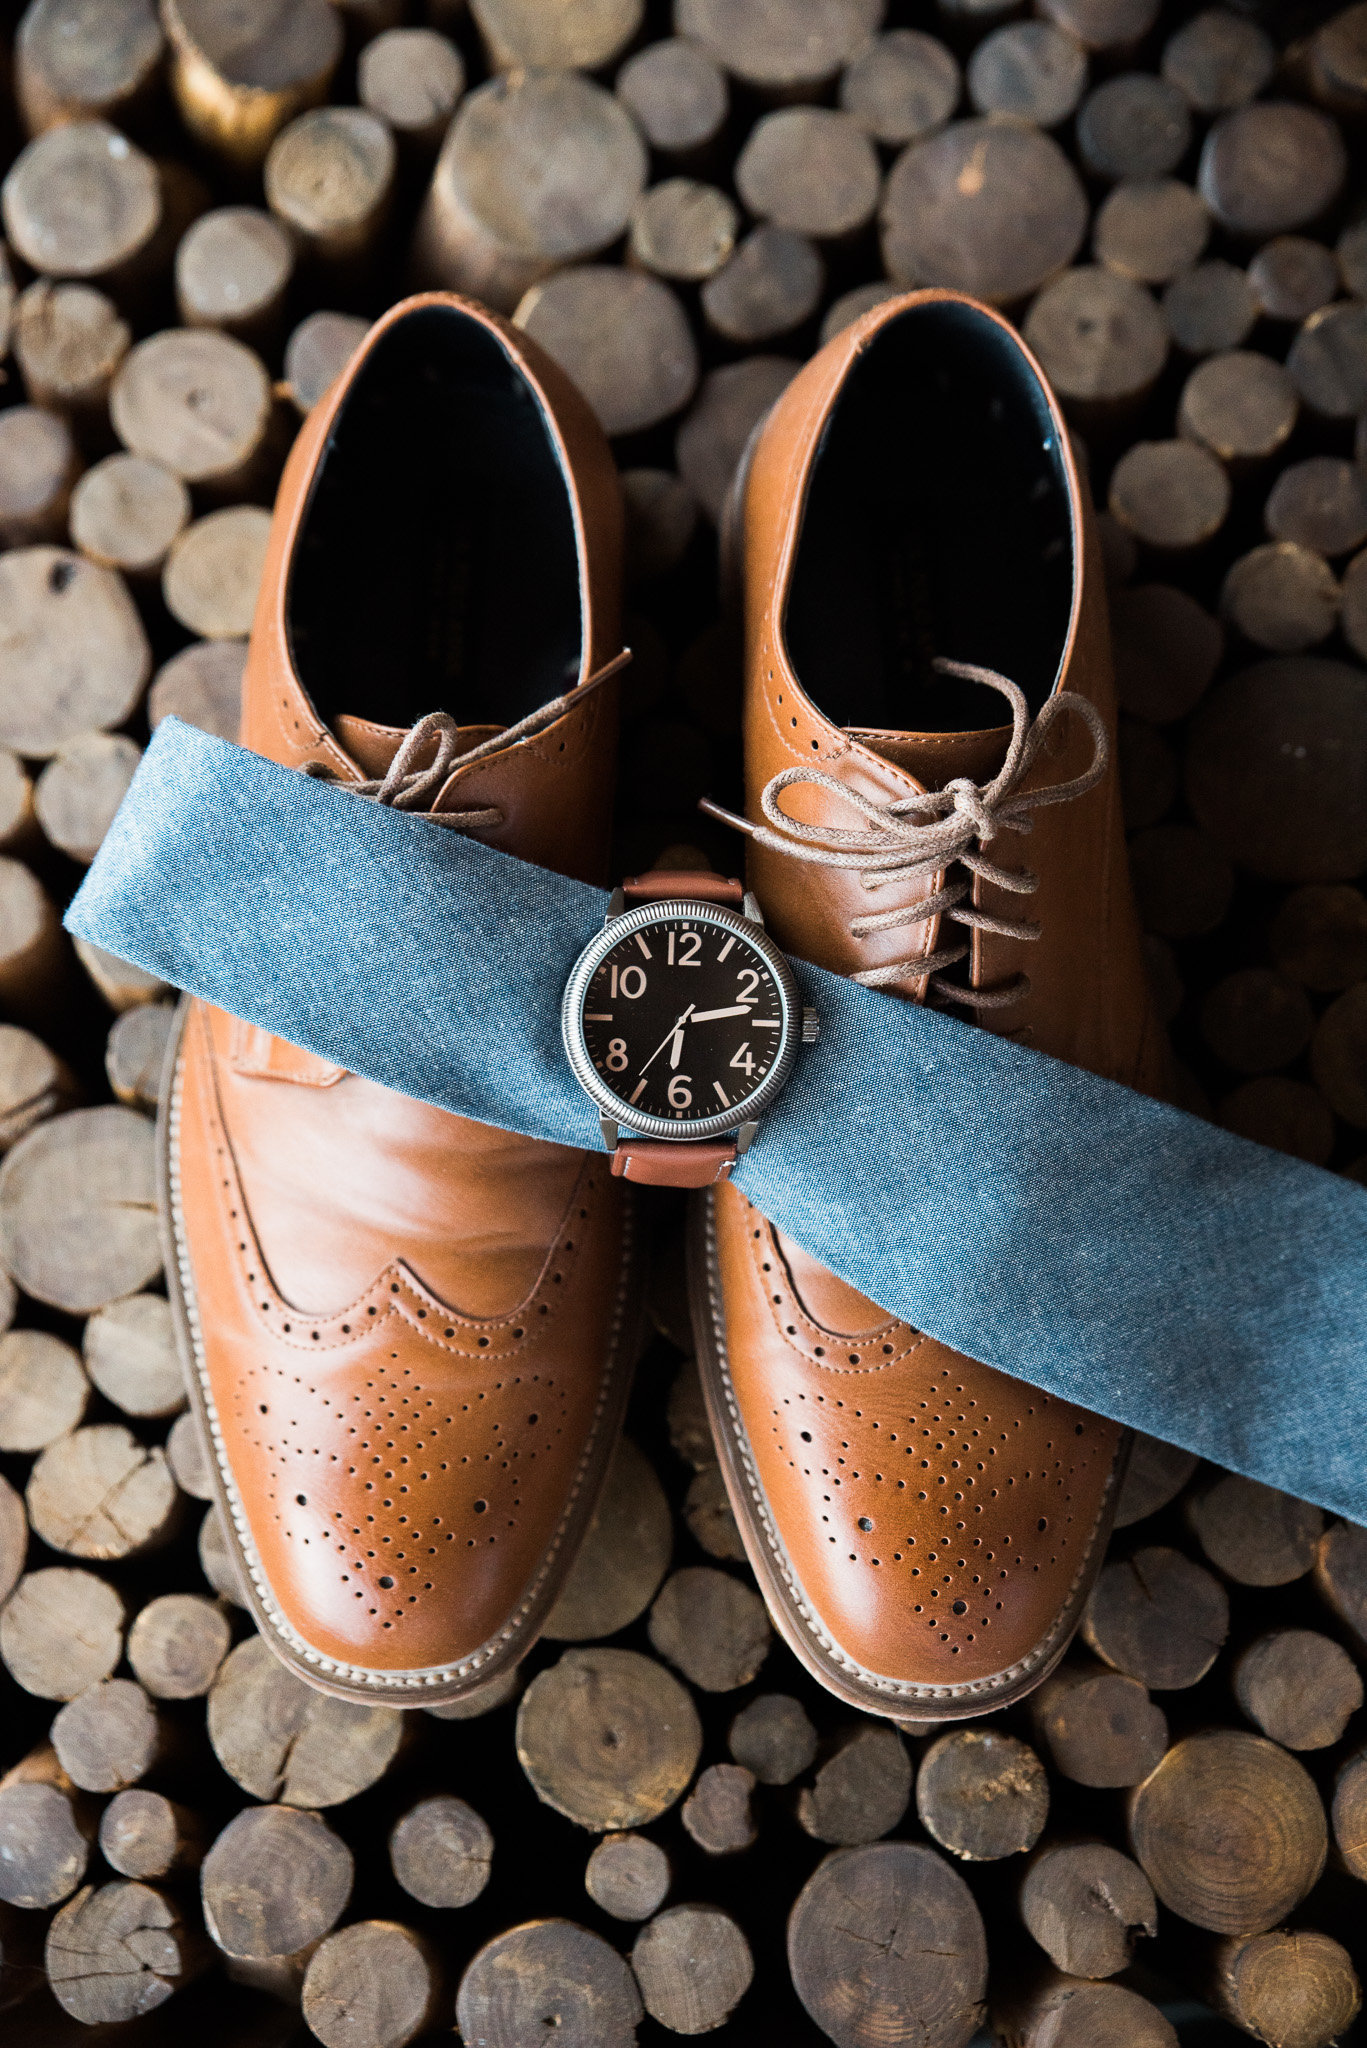 Tucson Kingan Gardens Wedding Photo of Groom Shoes, Tie, and Watch Details | Tucson Wedding Photographer | West End Photography